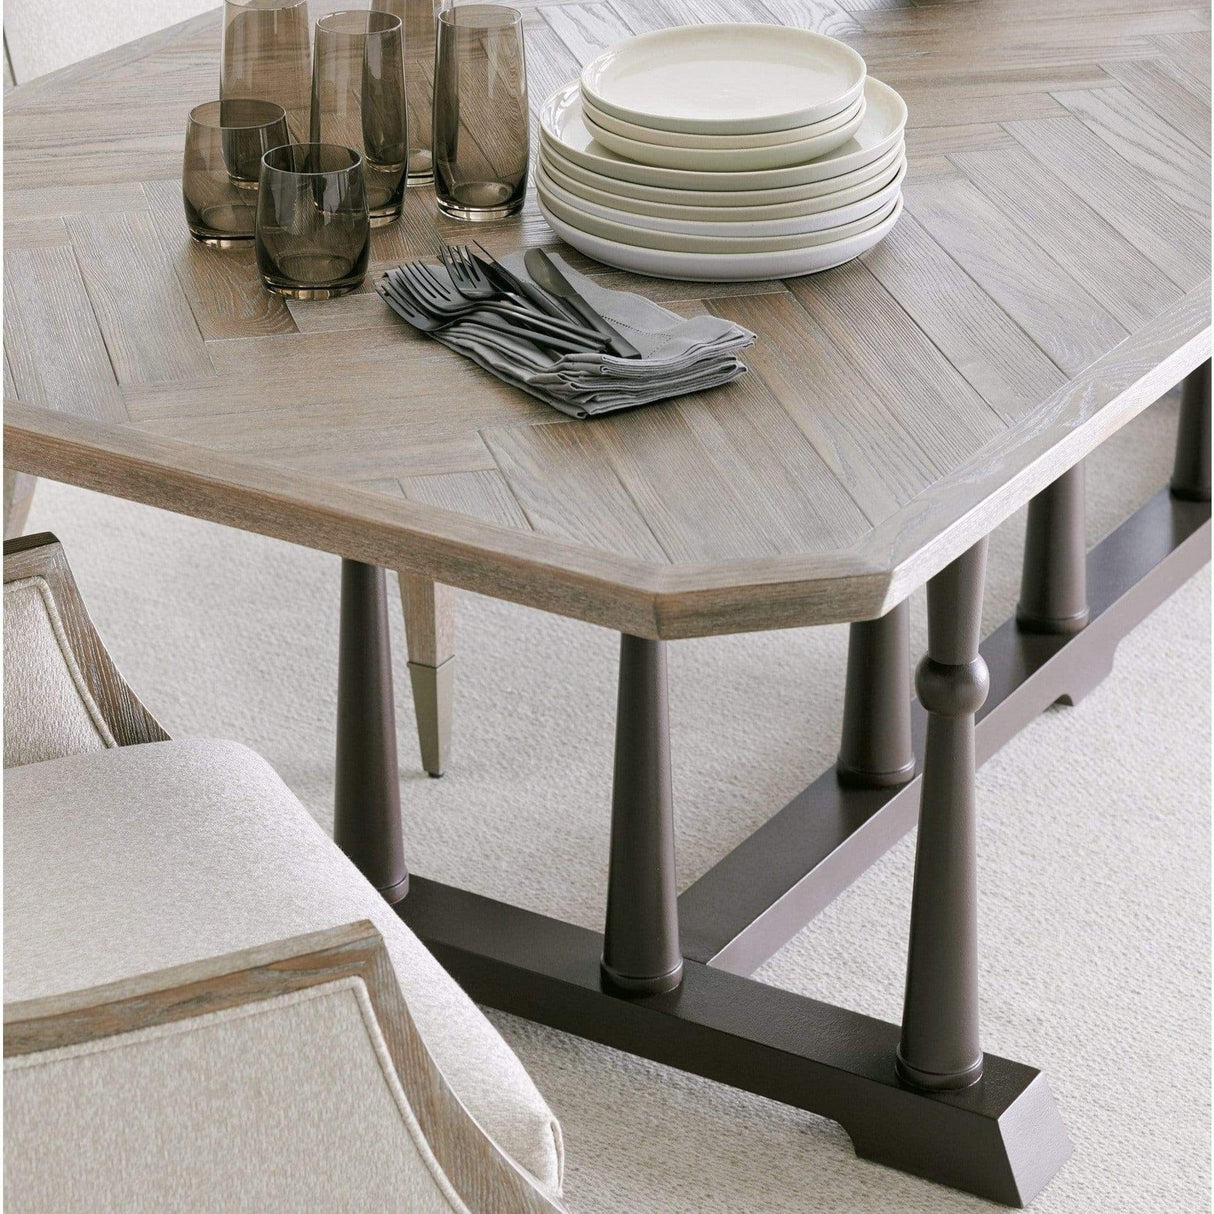 Caracole Dinner Circuit 96 Dining Table Furniture caracole-CLA-019-205 662896032642